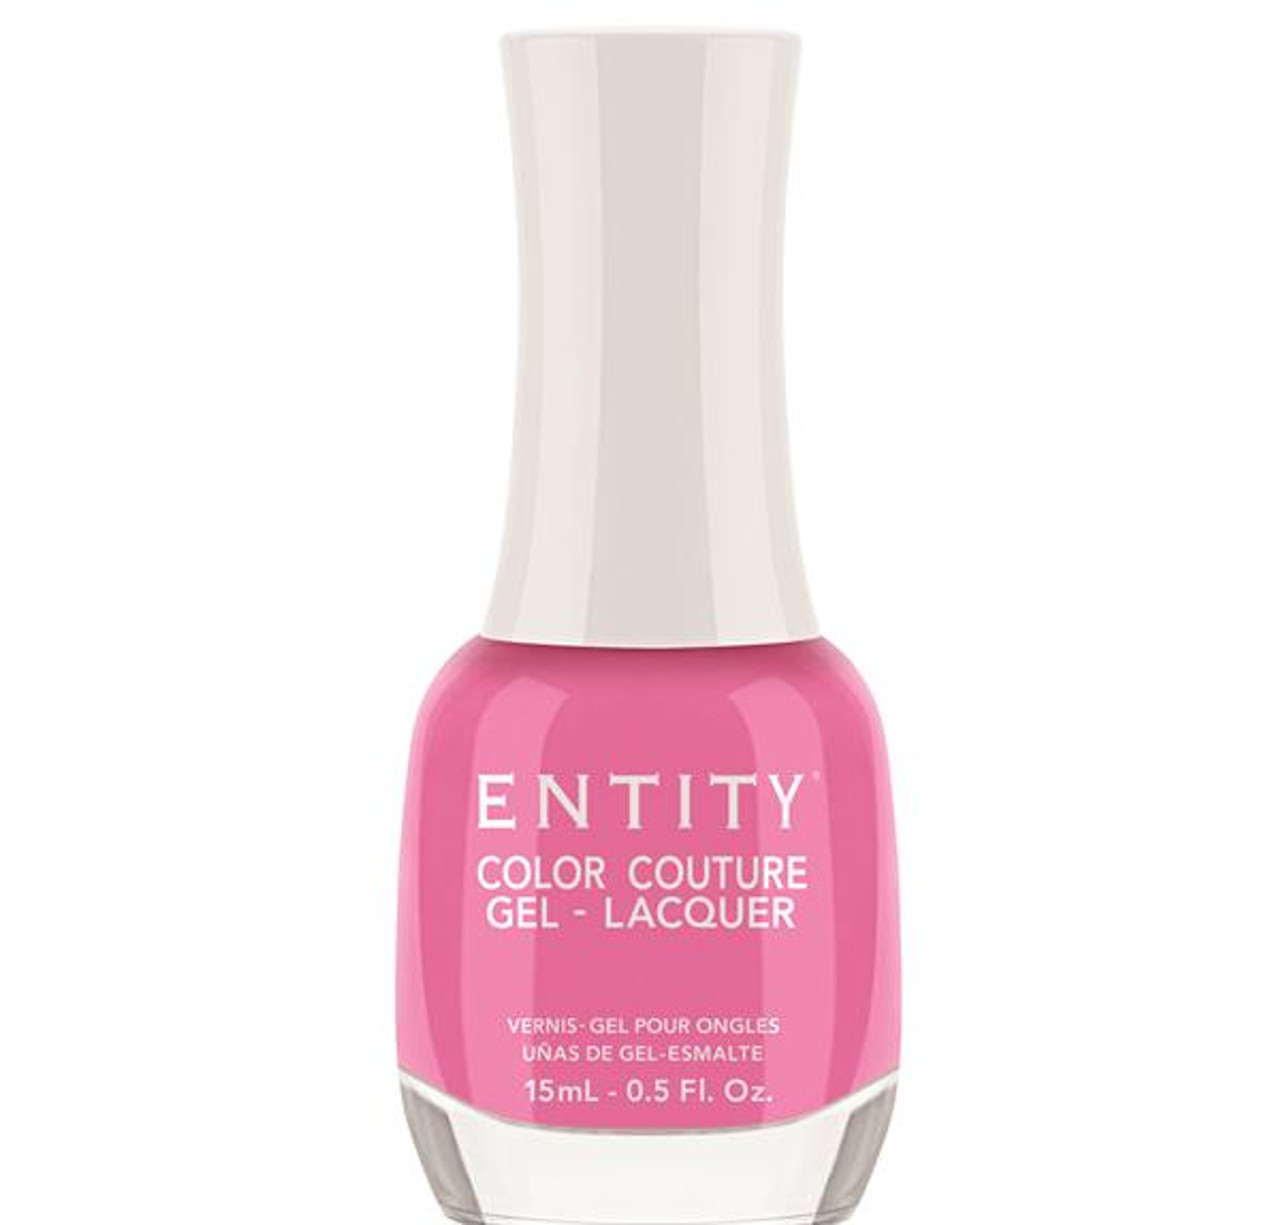 Entity Color Couture Gel-Lacquer SWEET CHIC - 15 mL / .5 fl oz